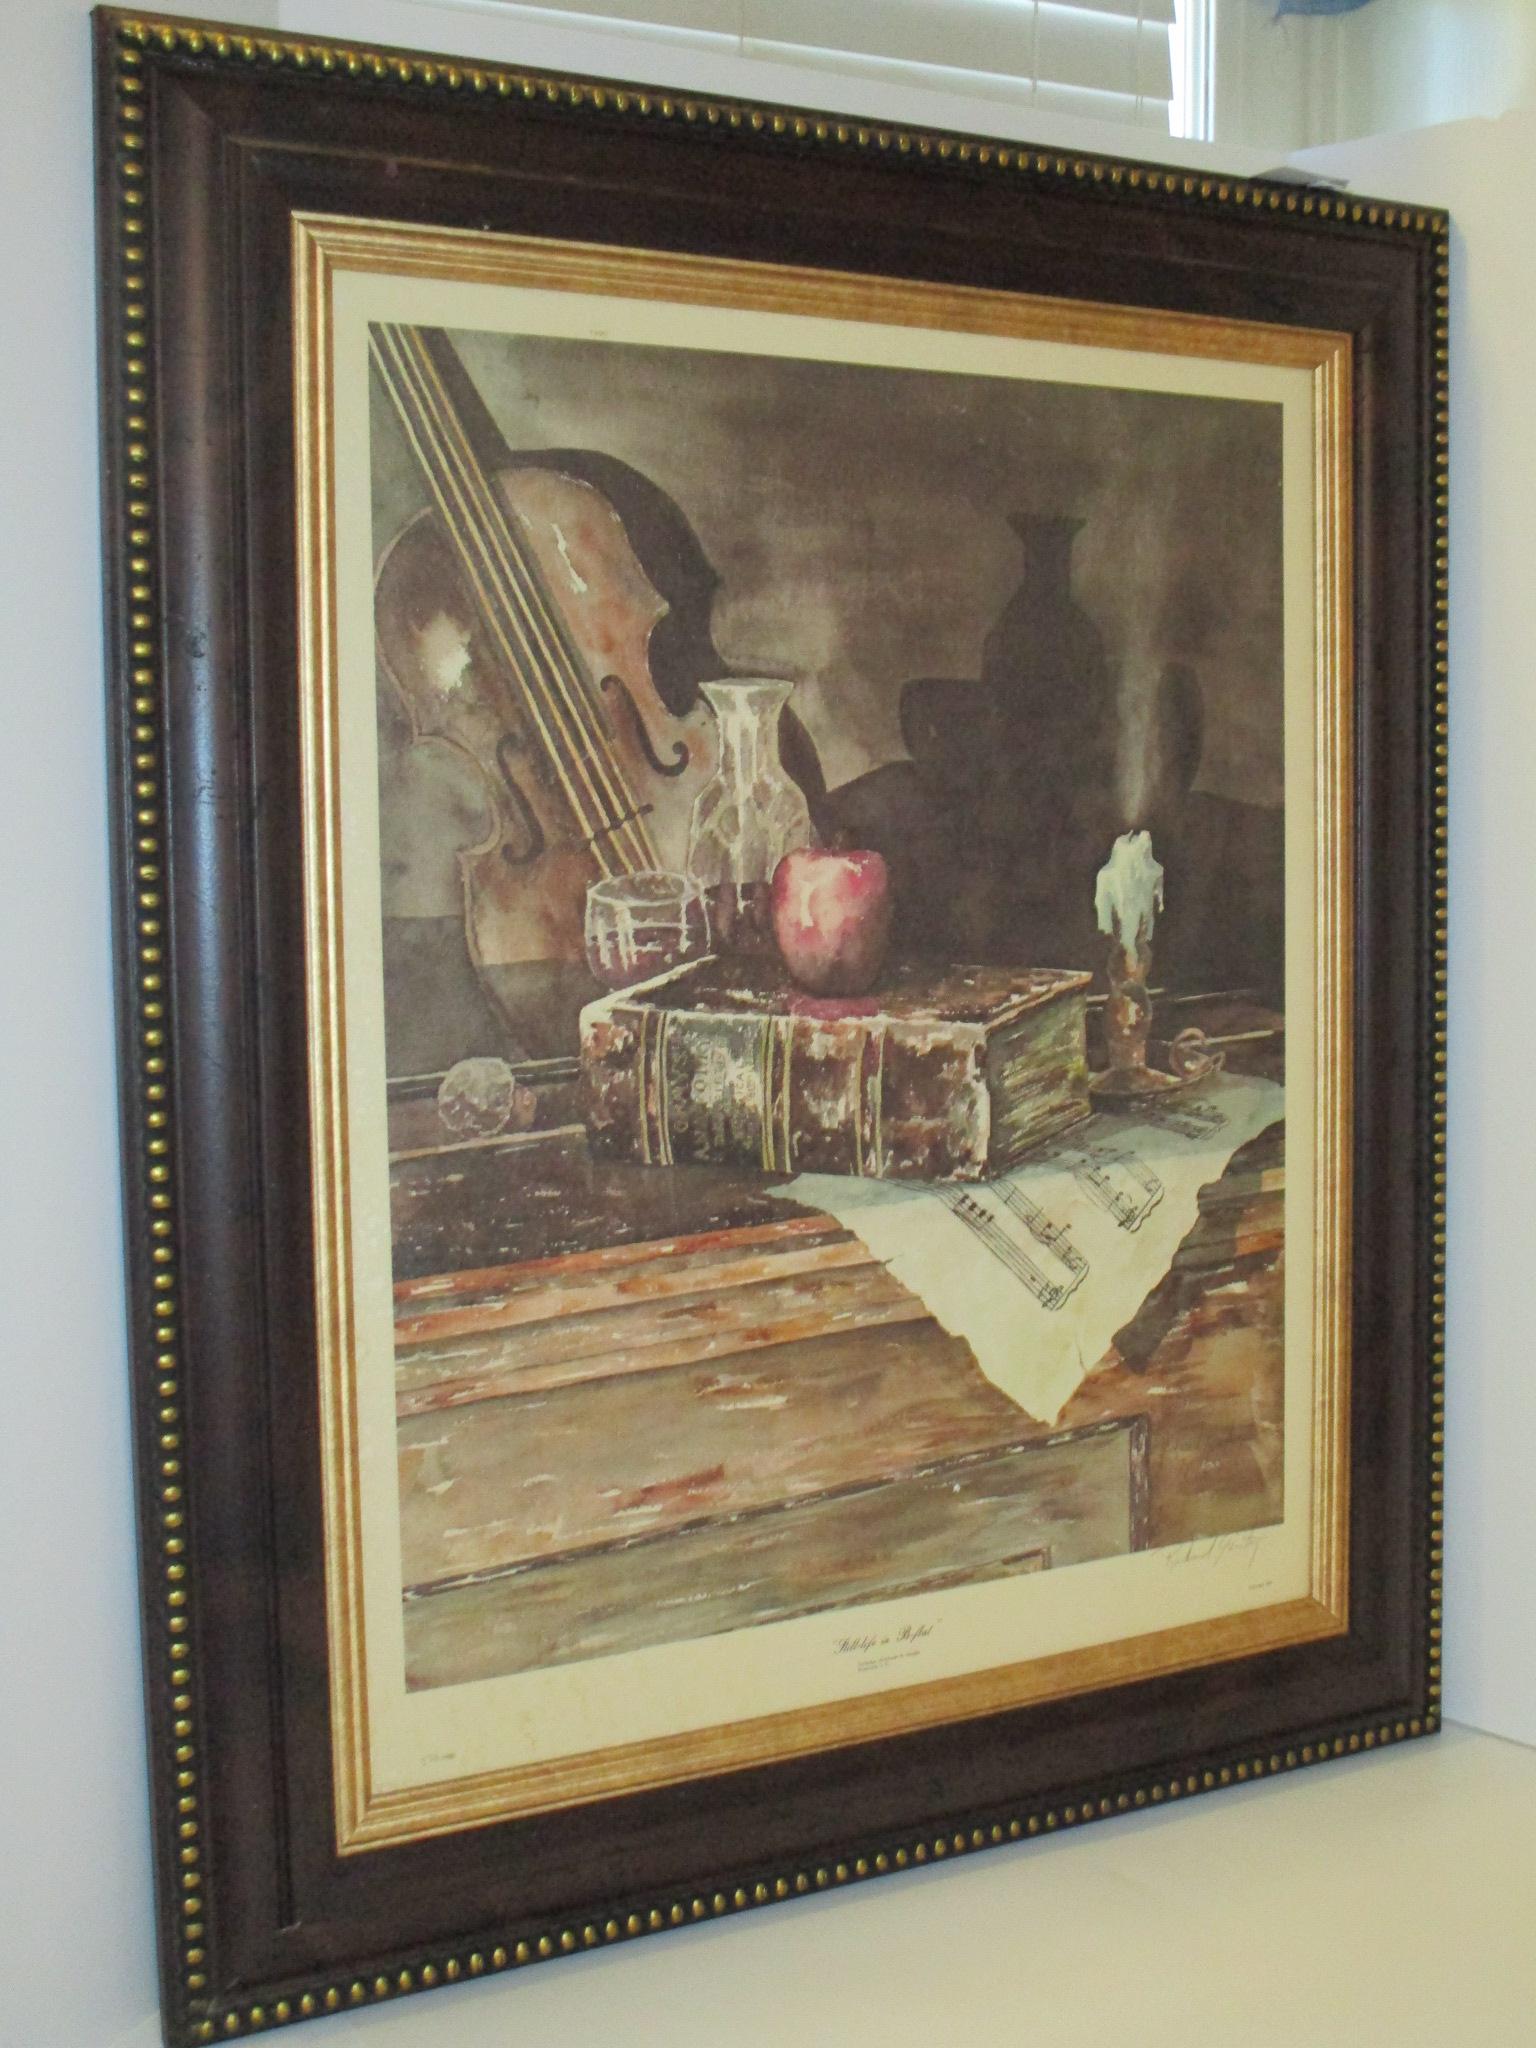 Richard Gentry Numbered Print "Still Life in B Flat"  Artist Signed    34" x 29 1/2"